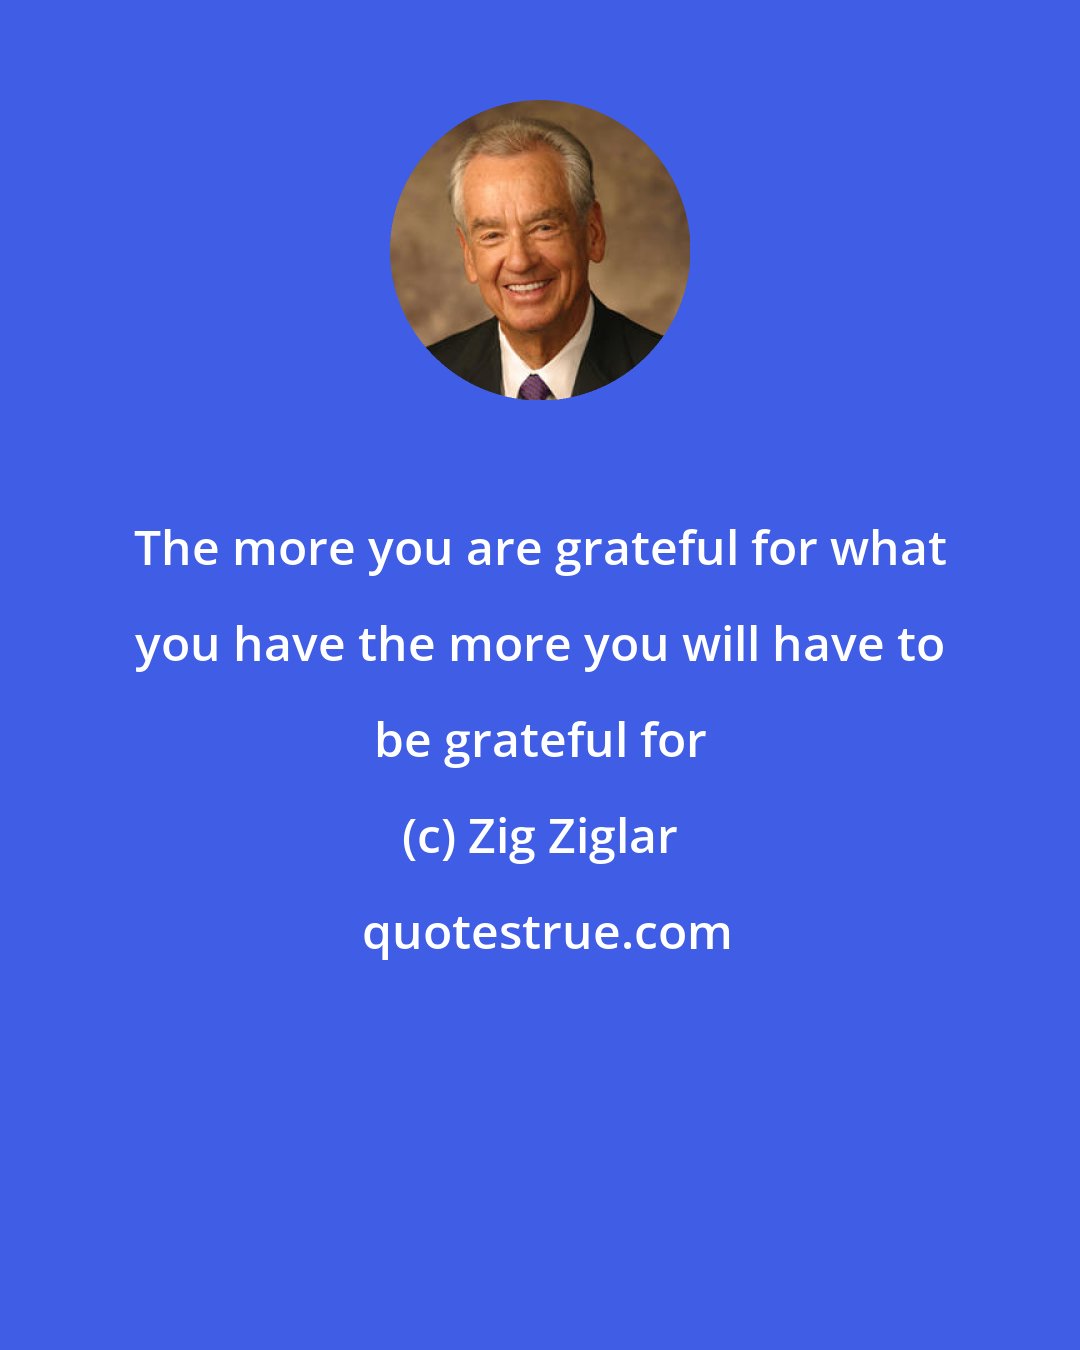 Zig Ziglar: The more you are grateful for what you have the more you will have to be grateful for